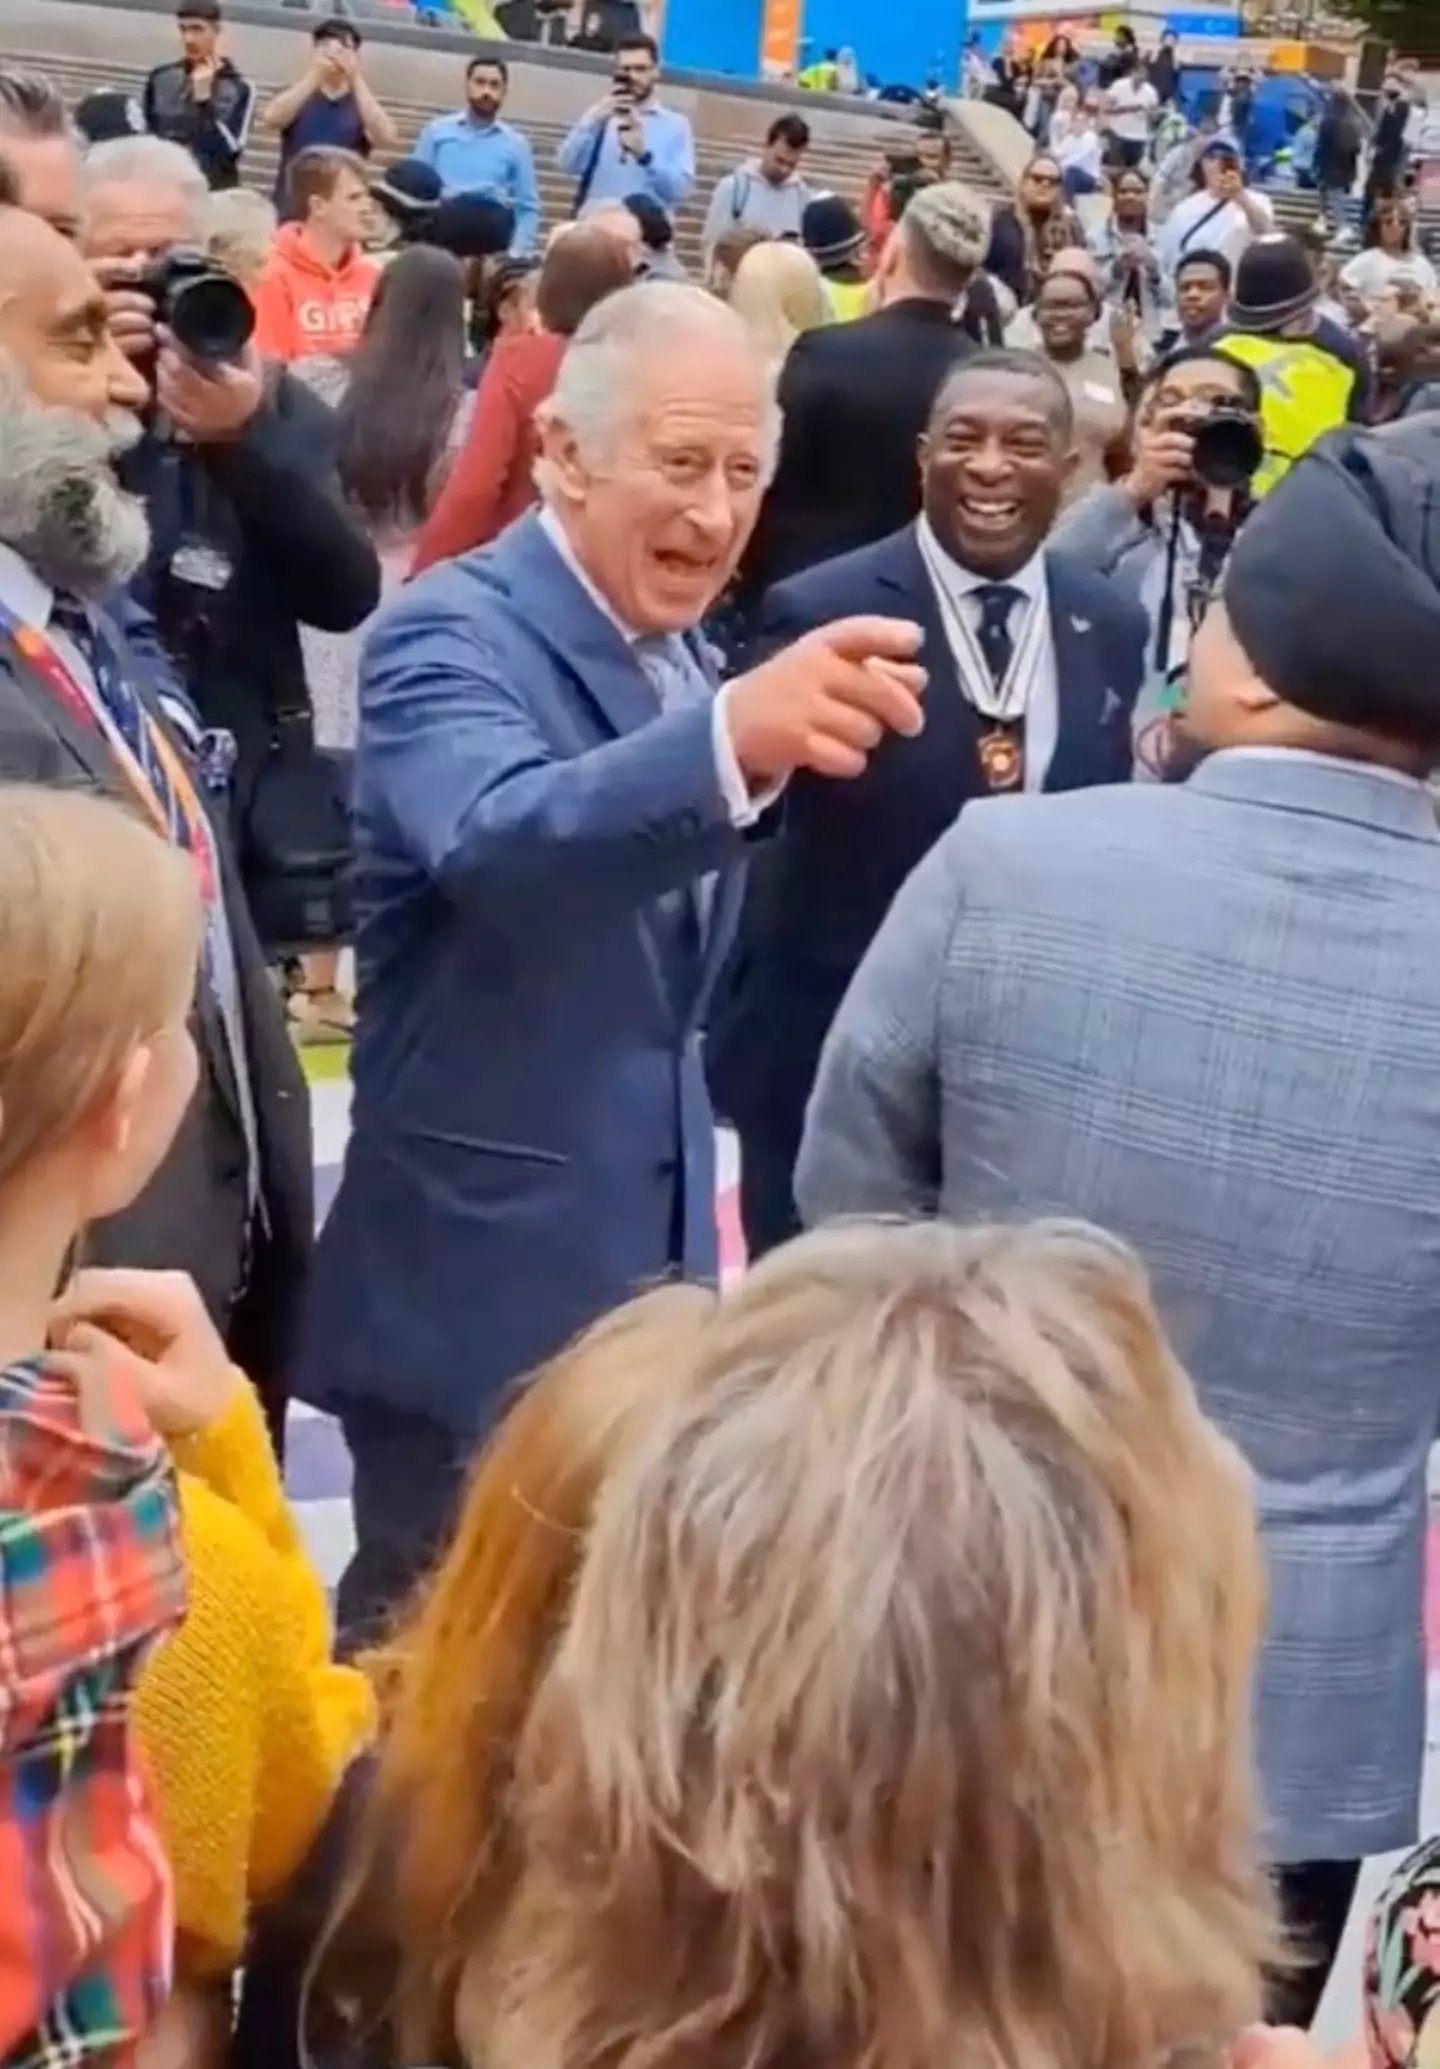 Prince Charles had the perfect response when someone asked him for a beer.